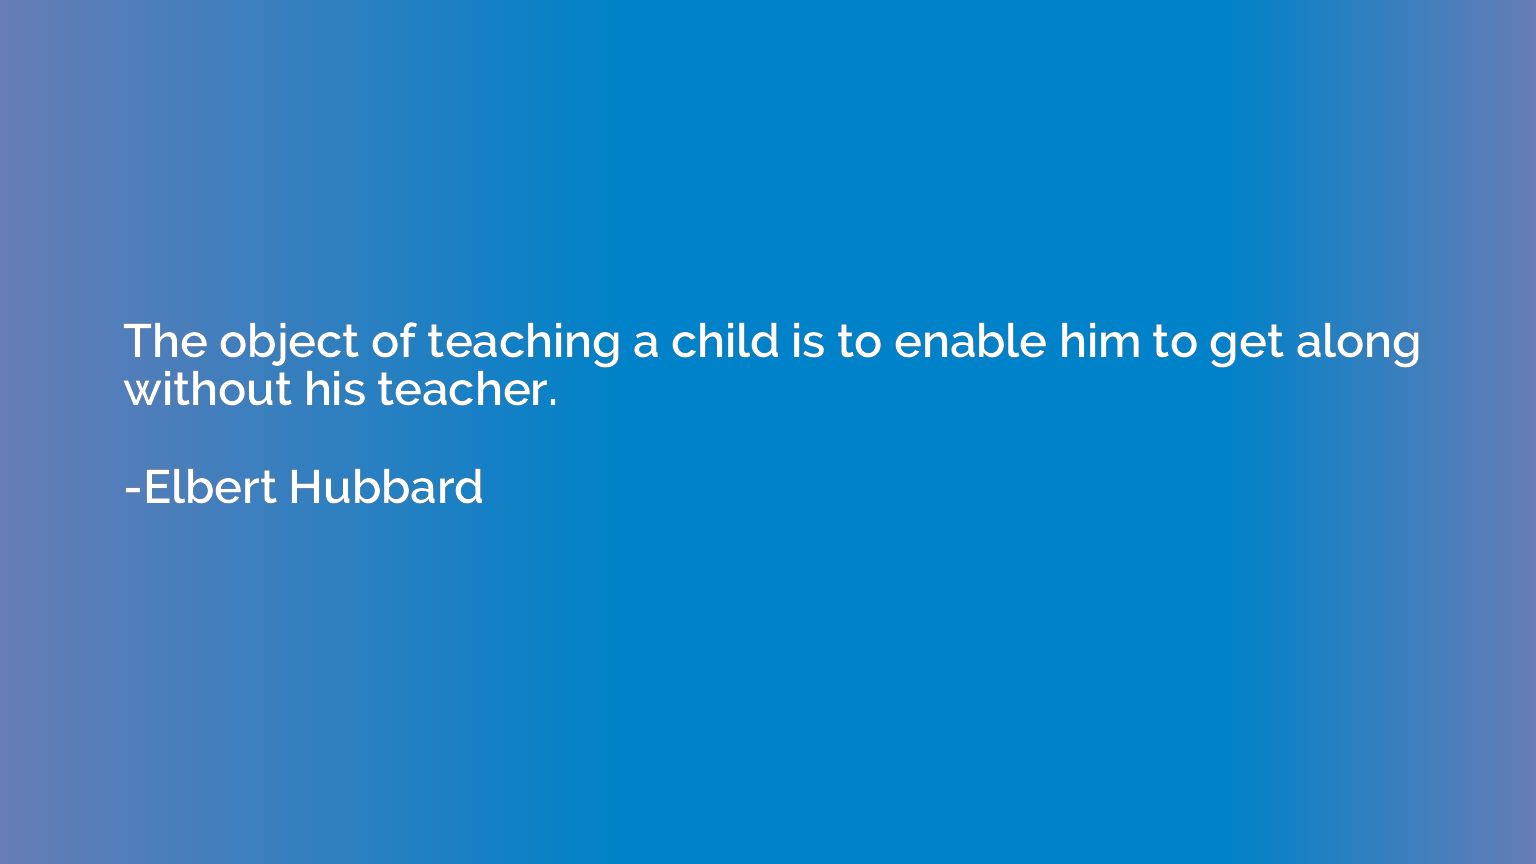 The object of teaching a child is to enable him to get along